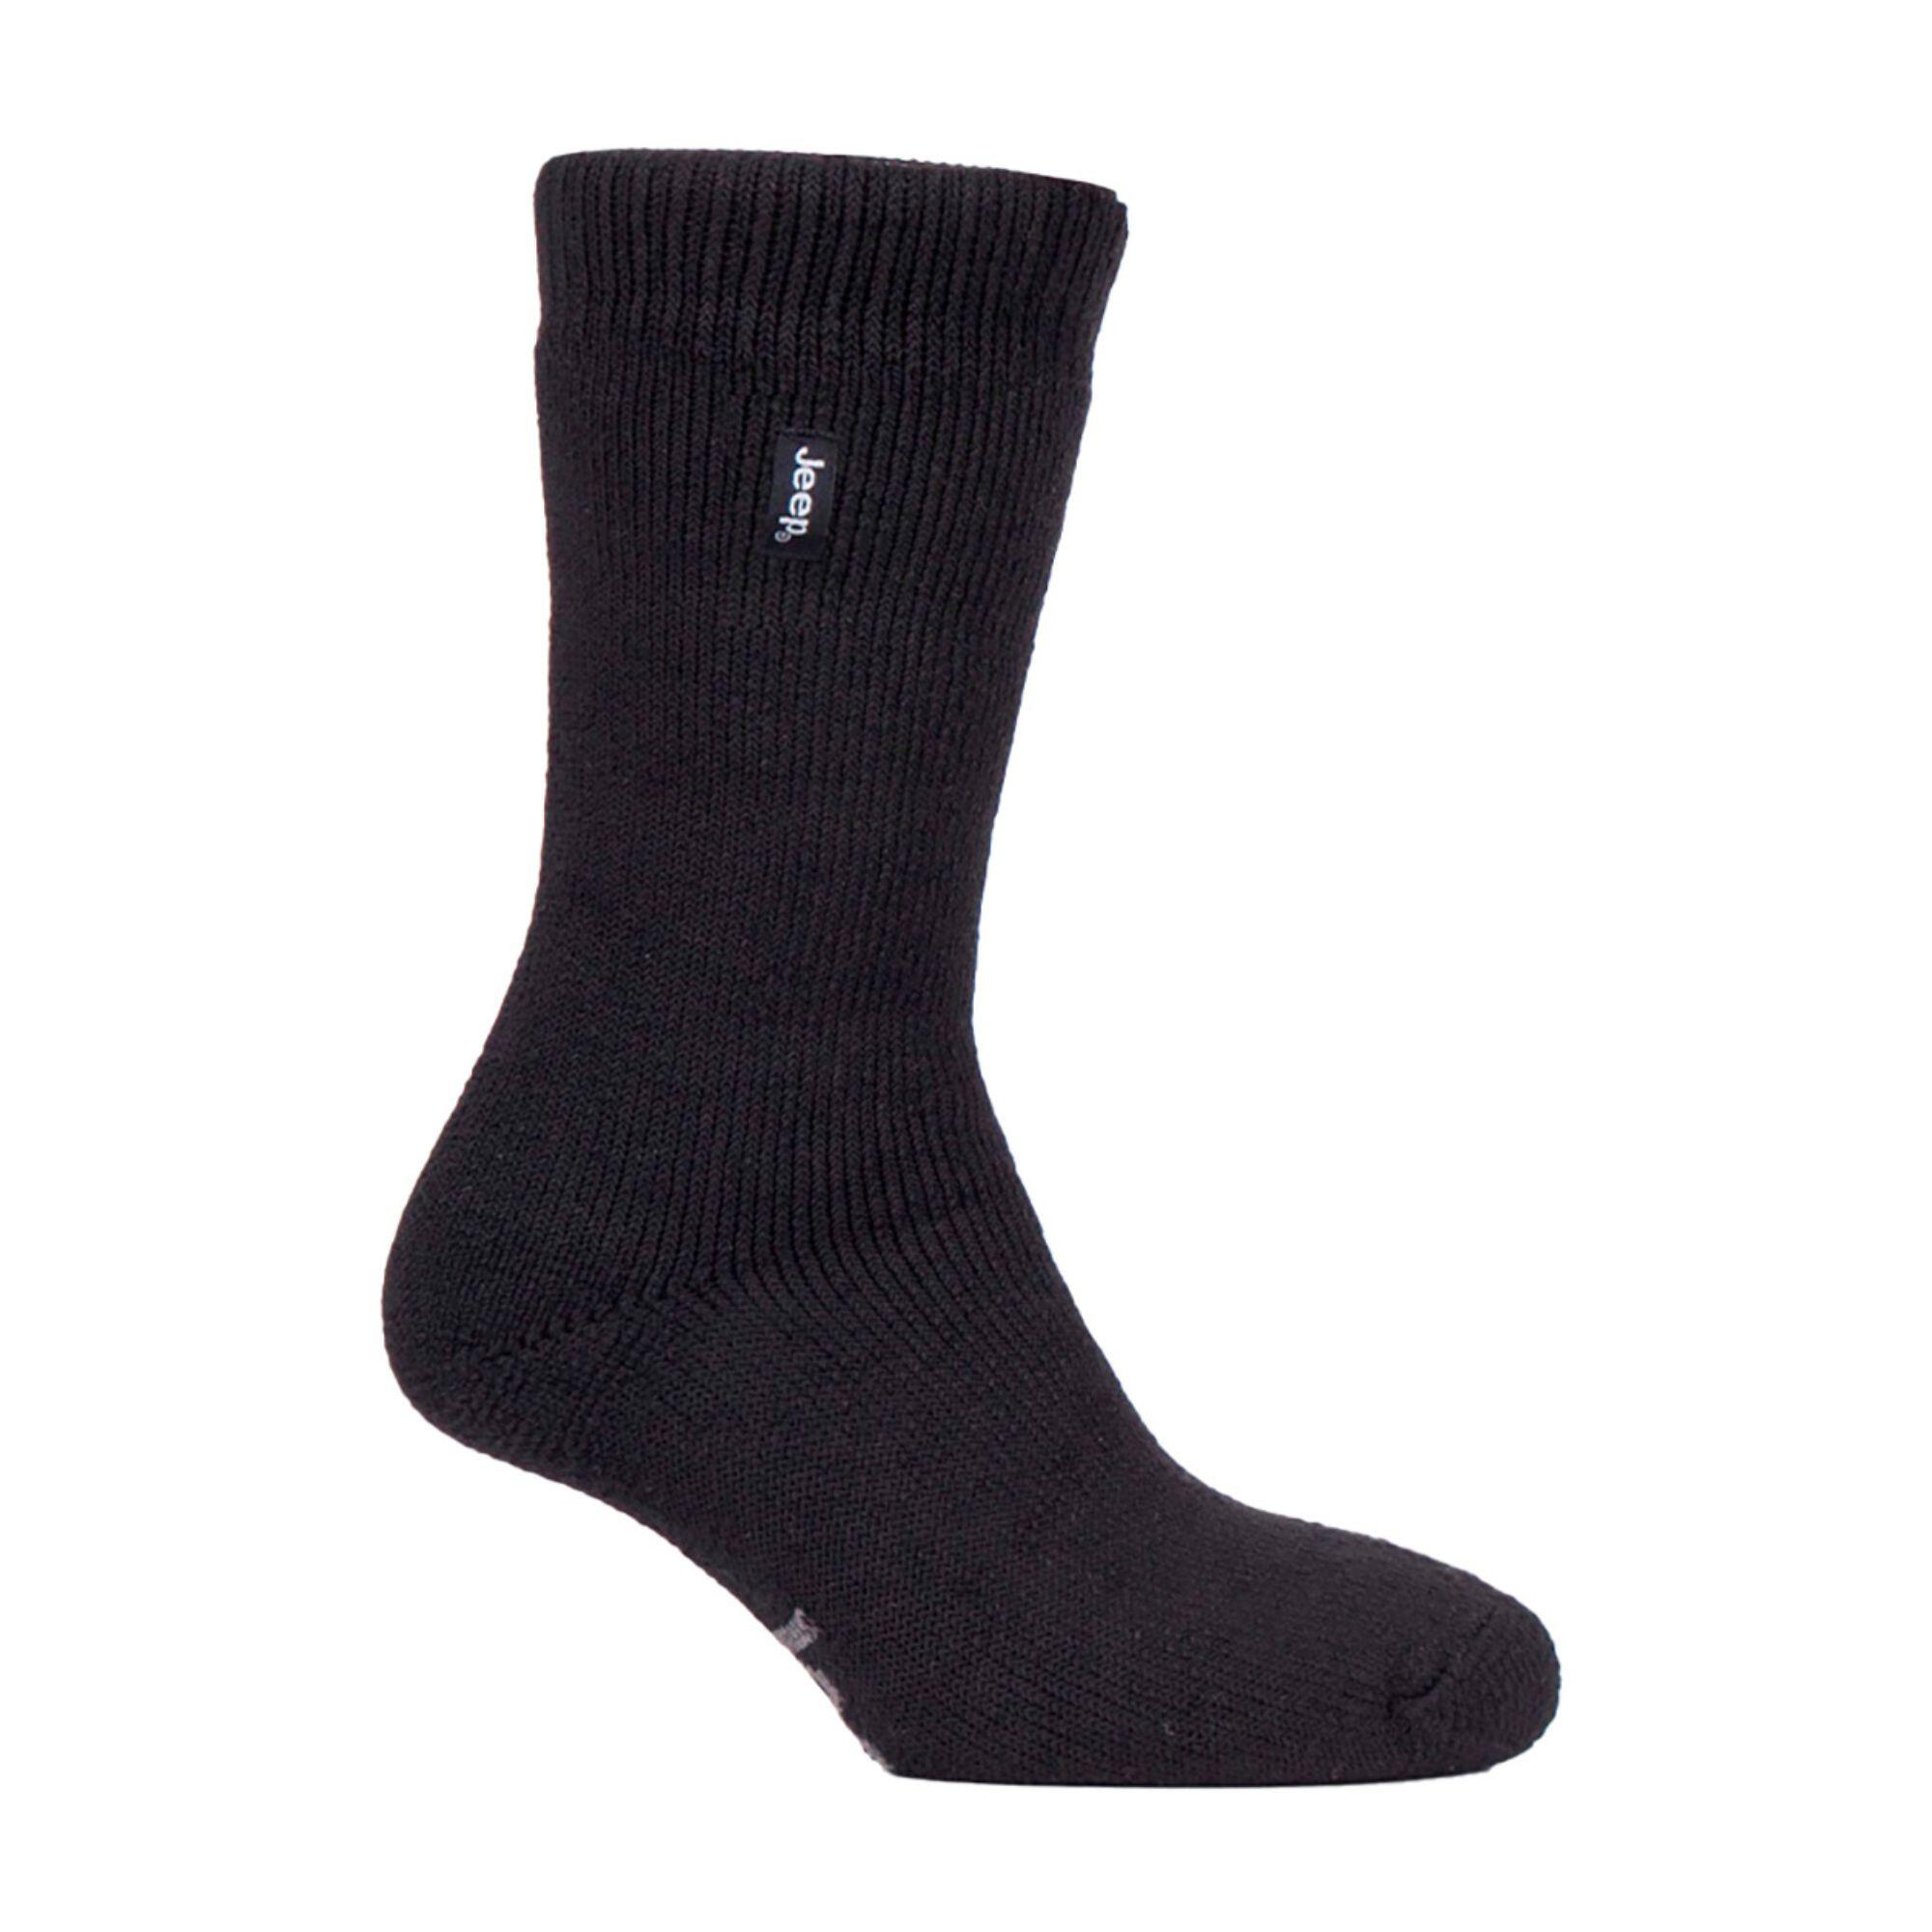 JEEP Mens Thermal Boot Hiking Socks for Winter